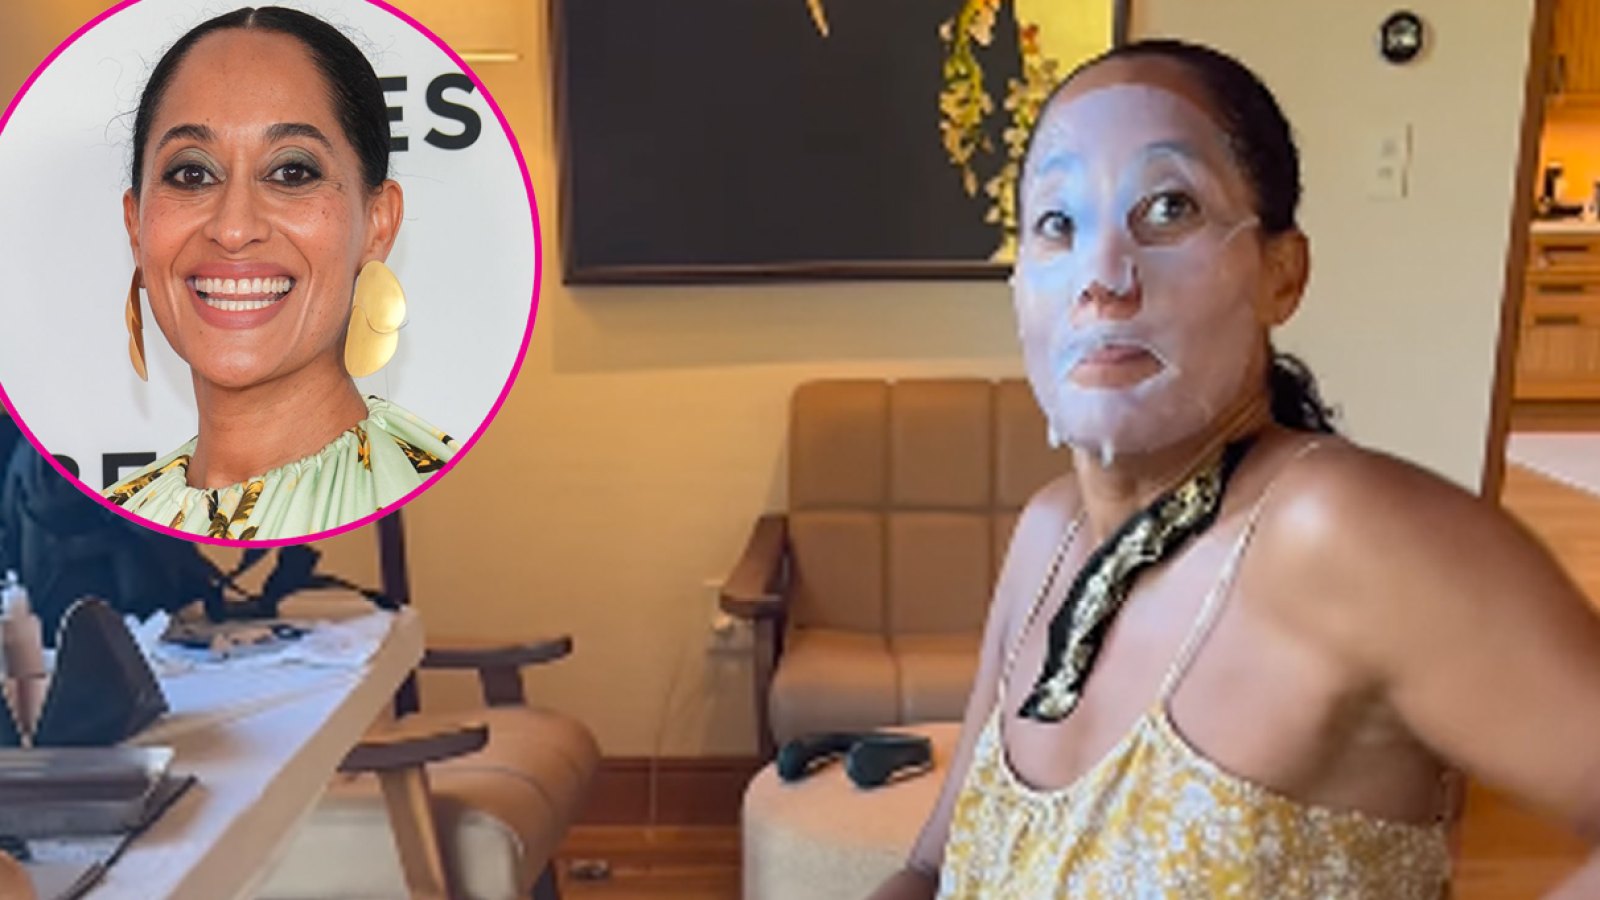 Tracee Ellis Ross Aggressively Uses Beauty Tools